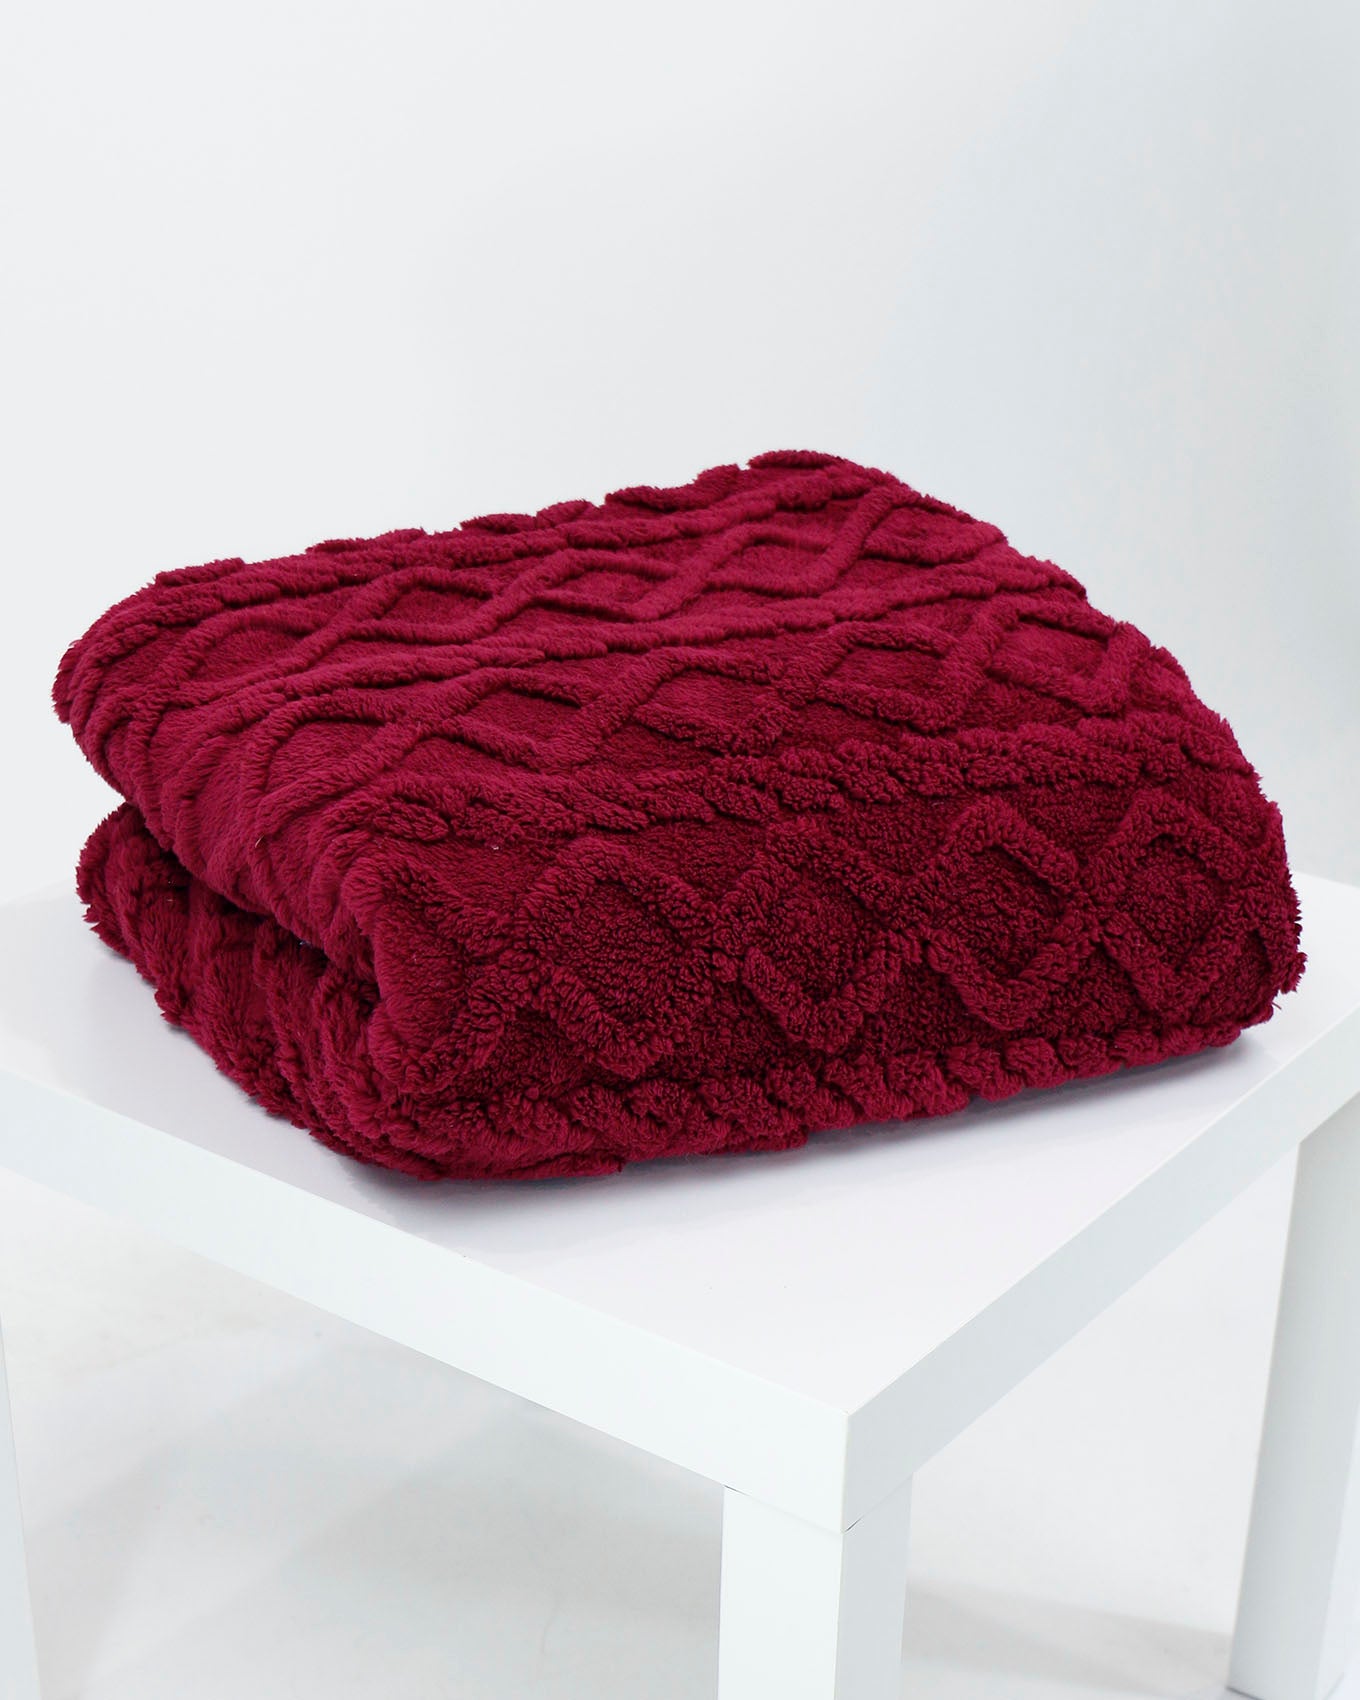 Cabled Winterberry Sherpa Blanket - Grace and Lace